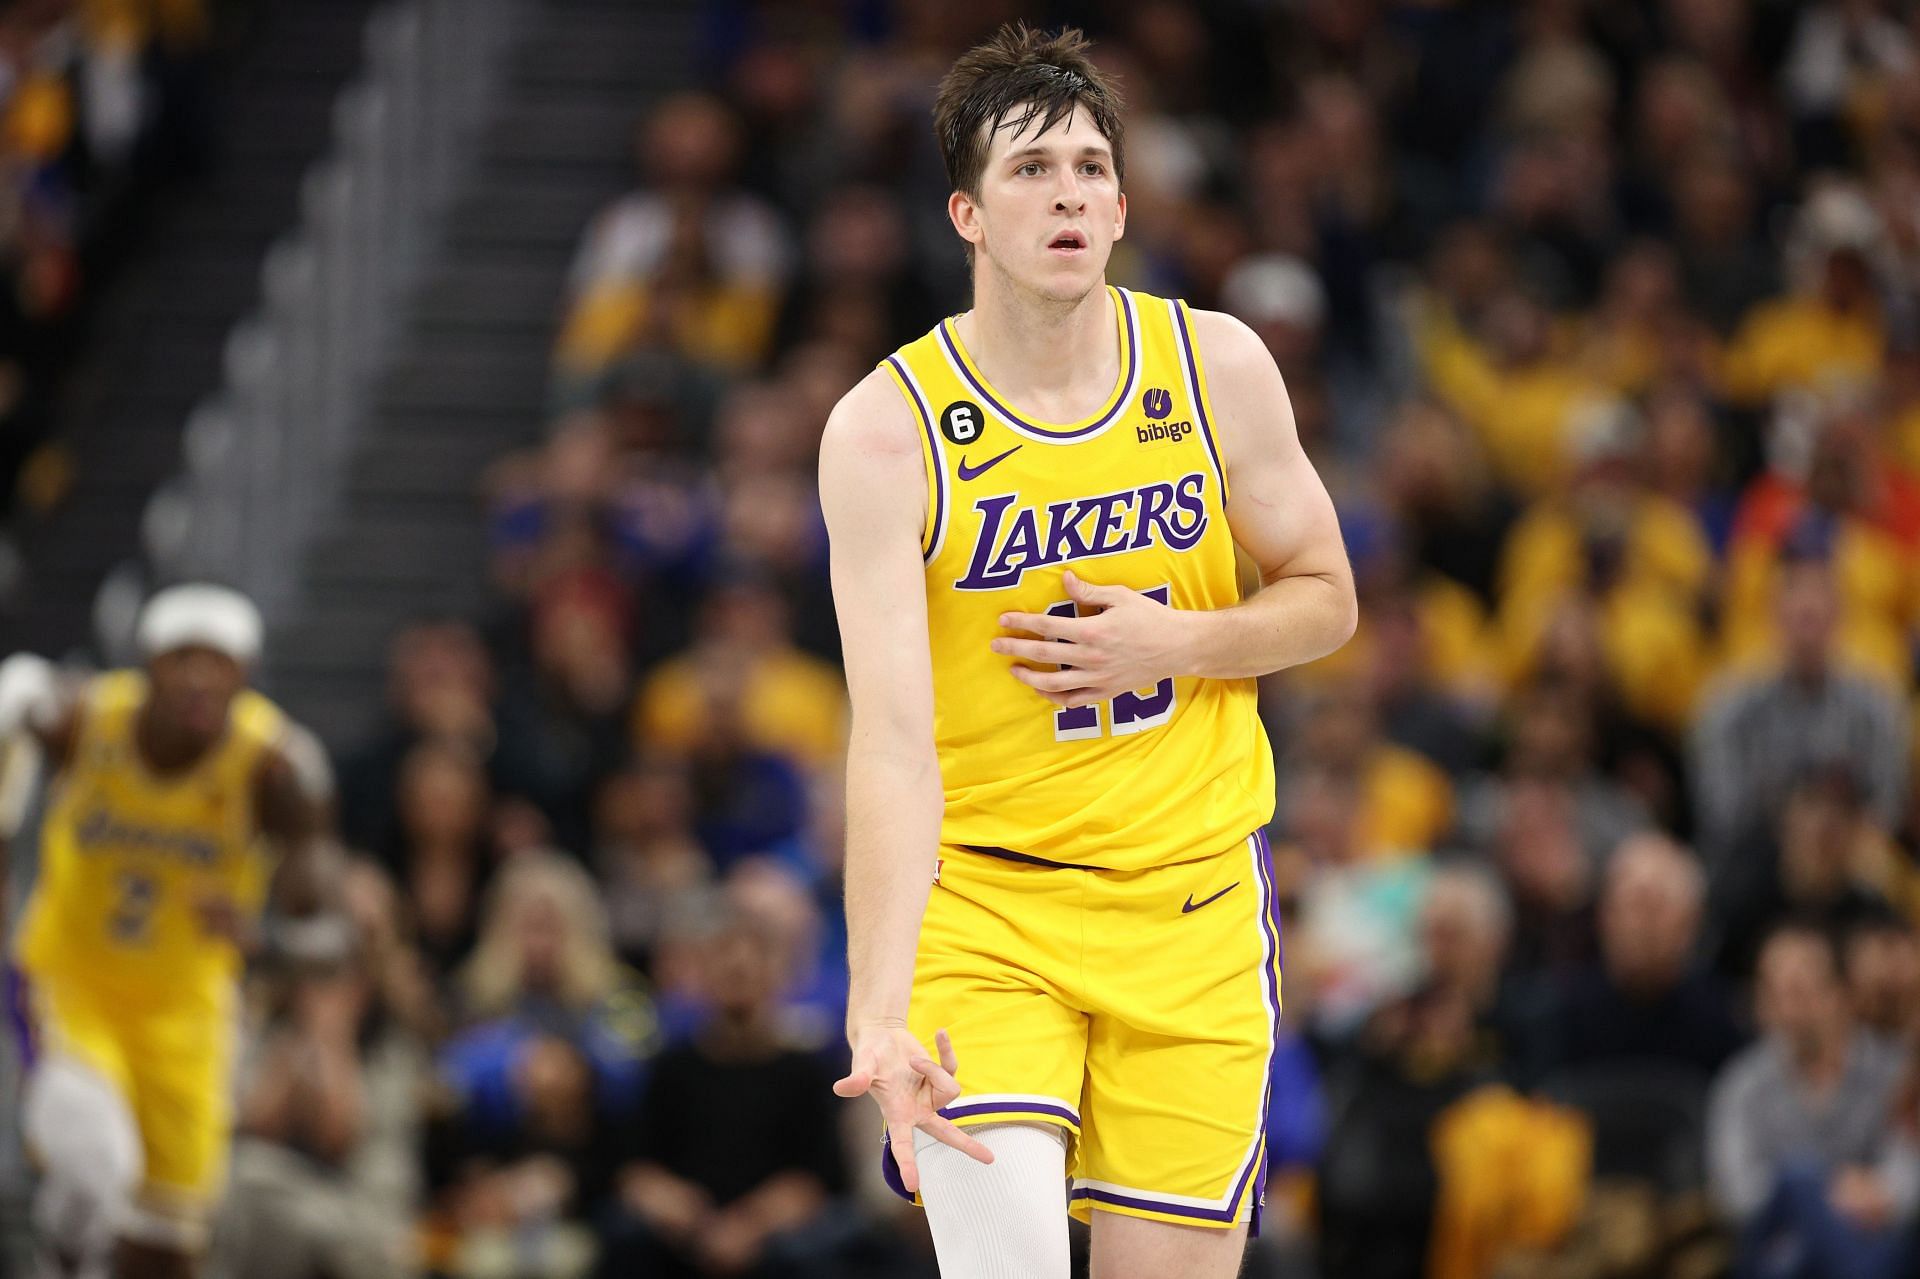 Lakers: Austin Reaves Credits Home Crowd for Big Win Over Jazz - All Lakers